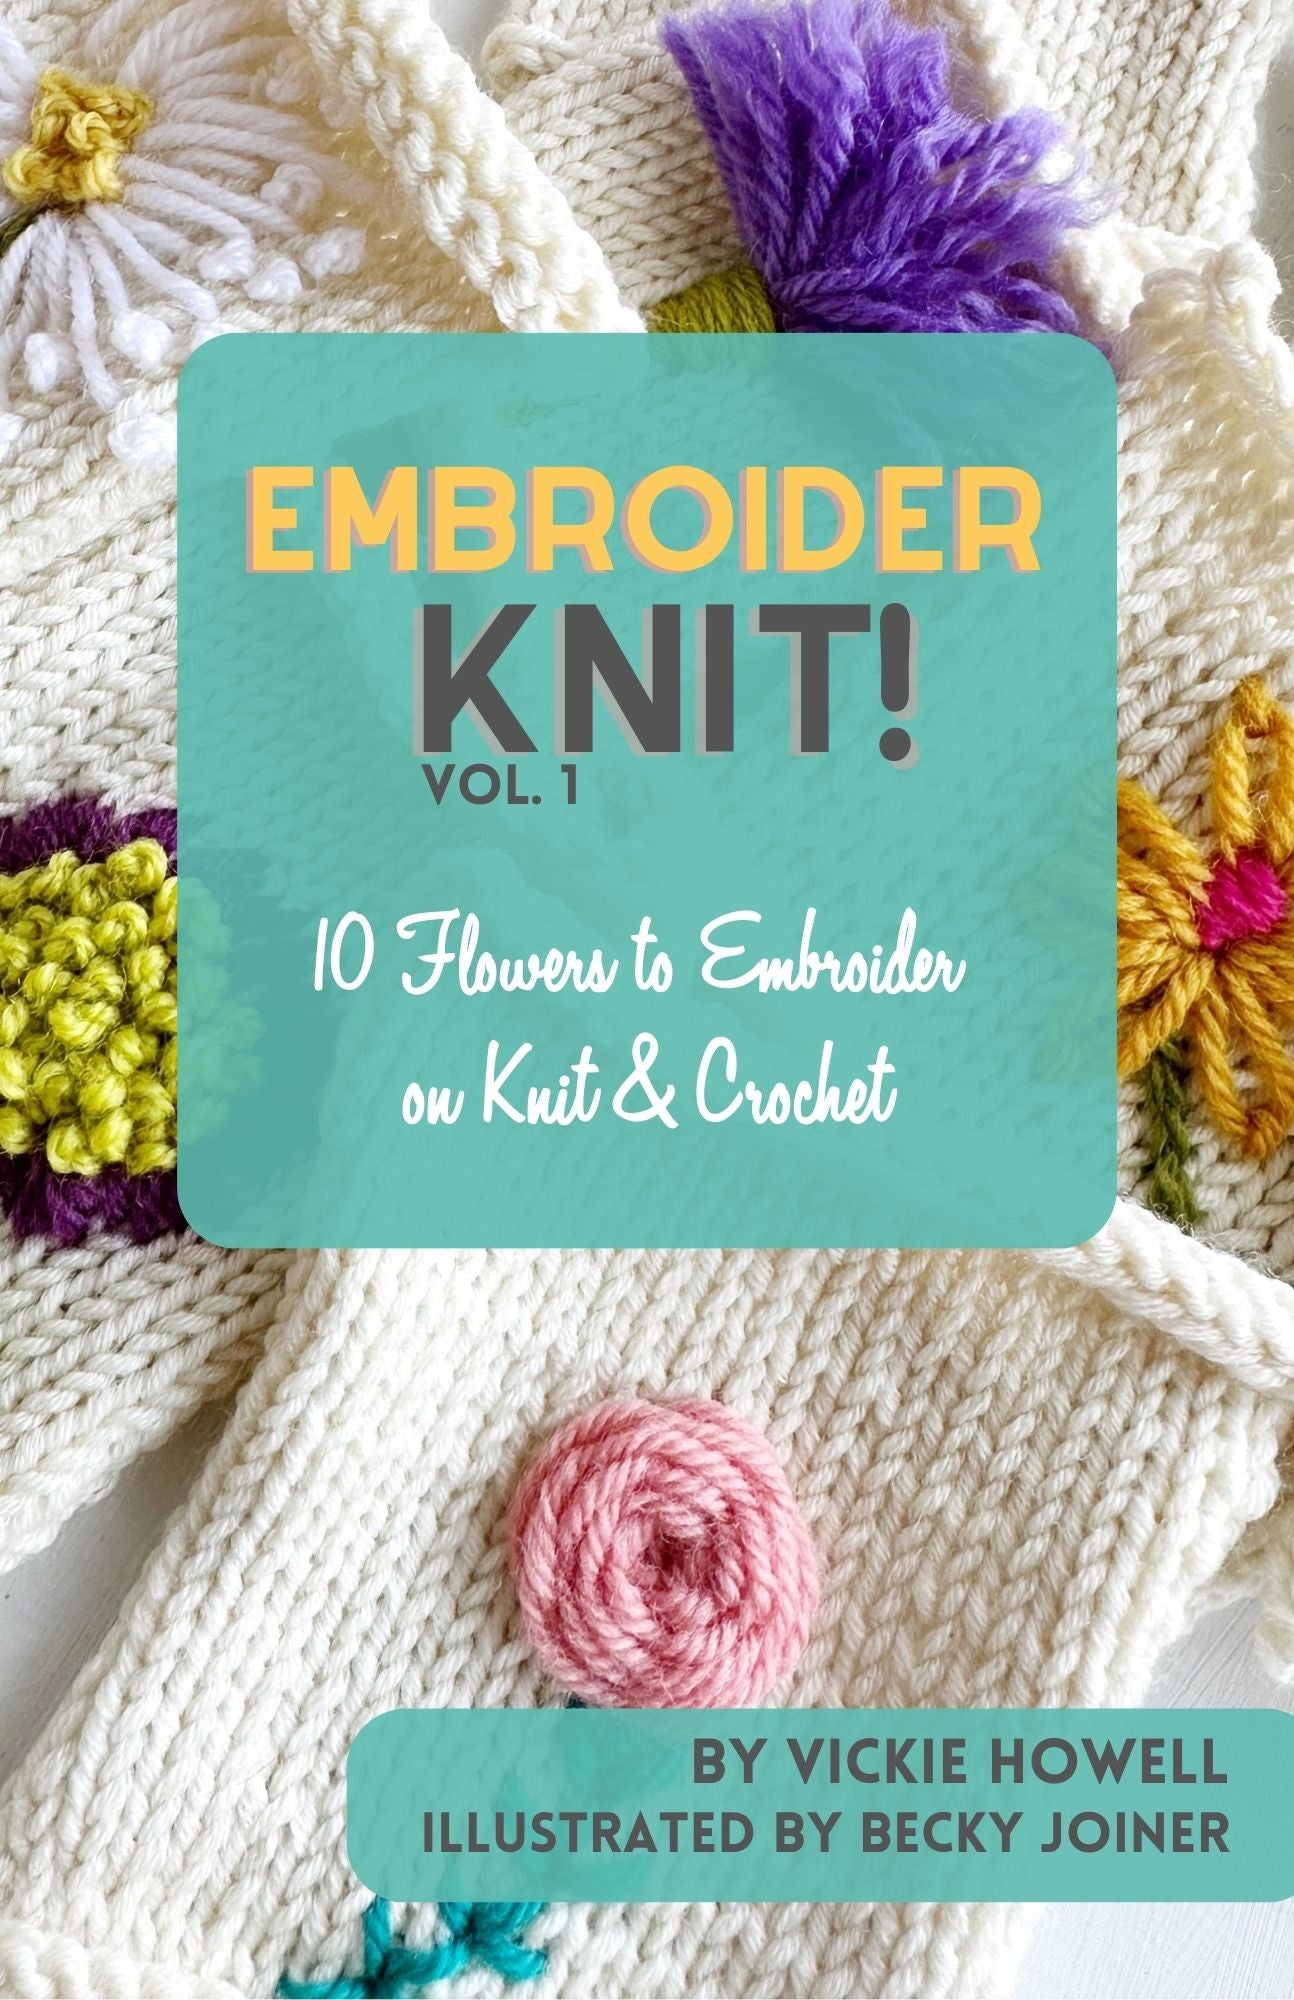 Embroider Knit! Vol. 1 Booklet